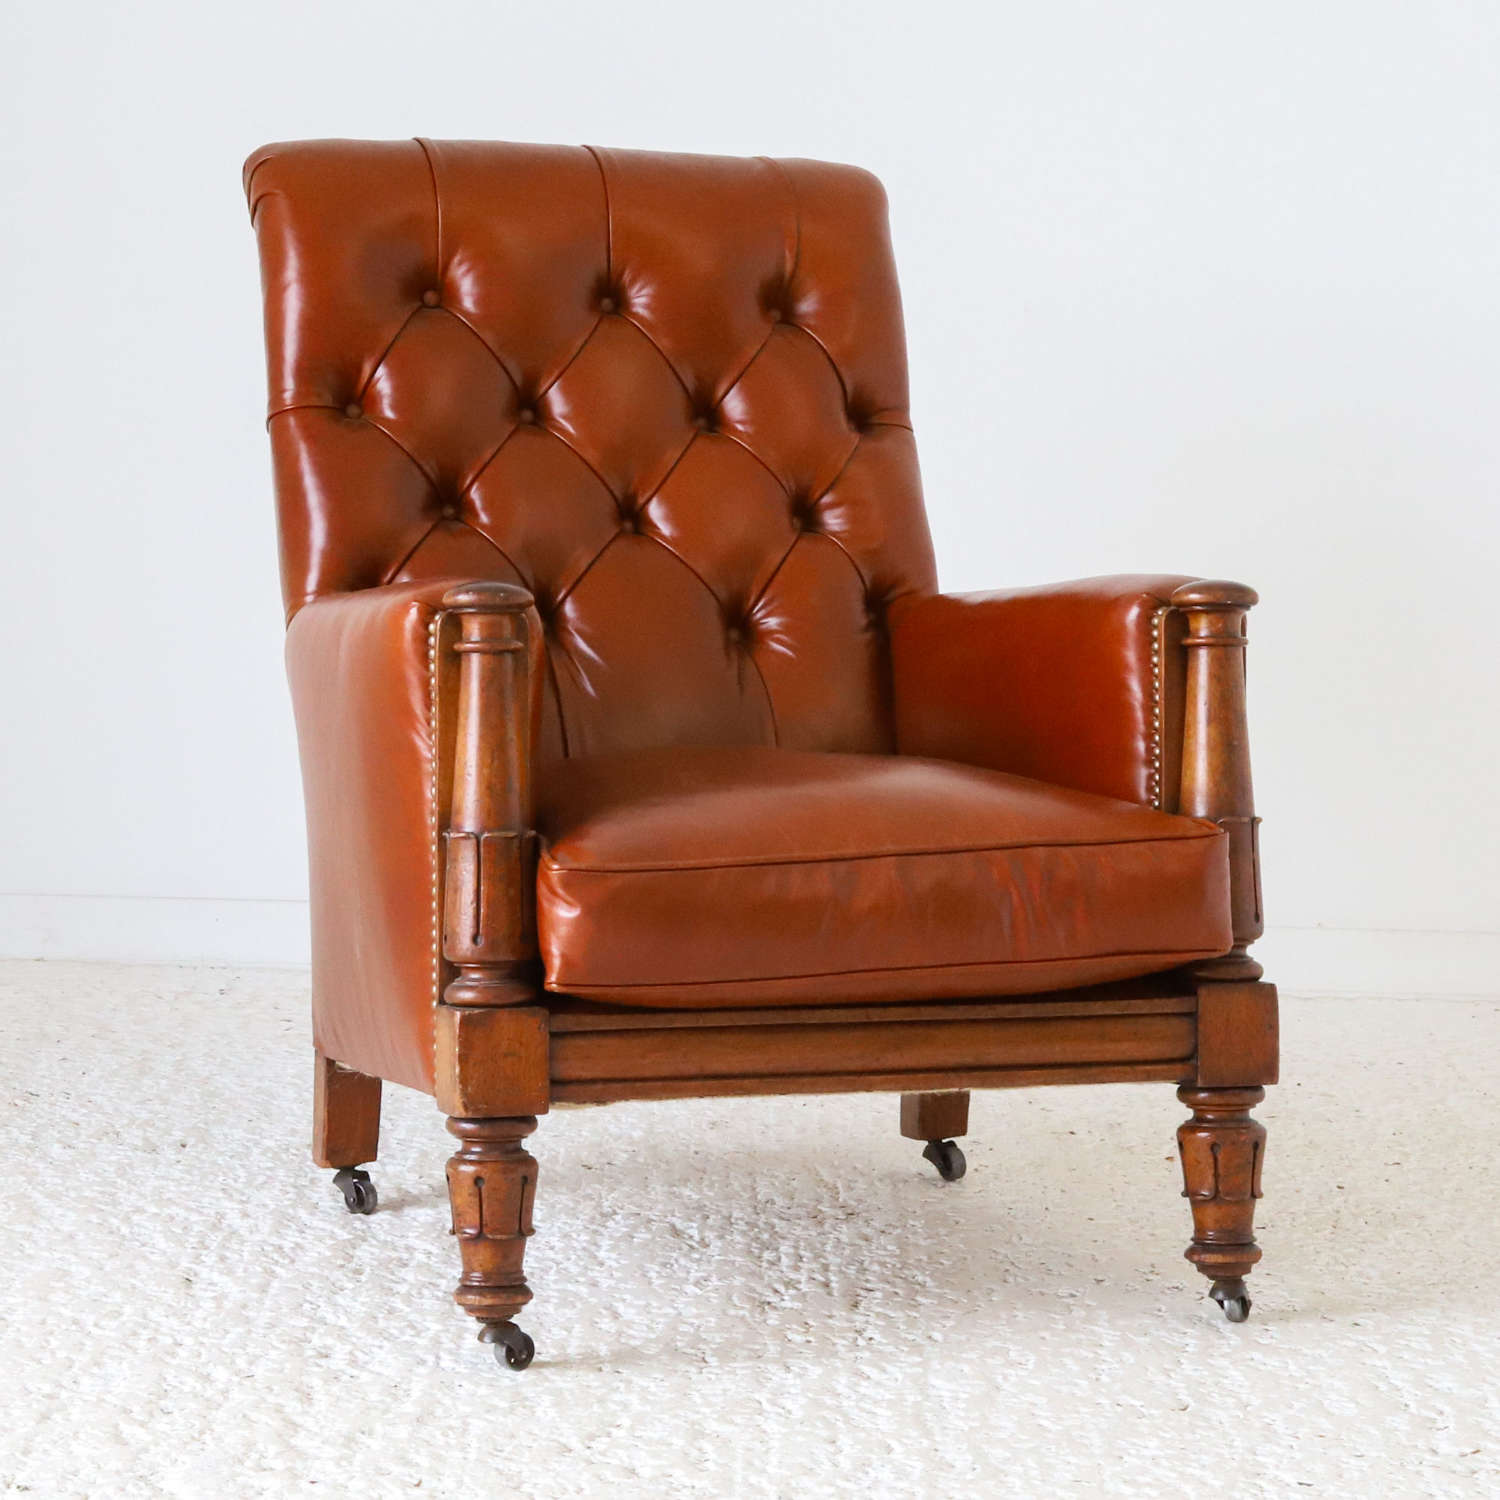 English William IV Library Chair reupholstered in tan leather